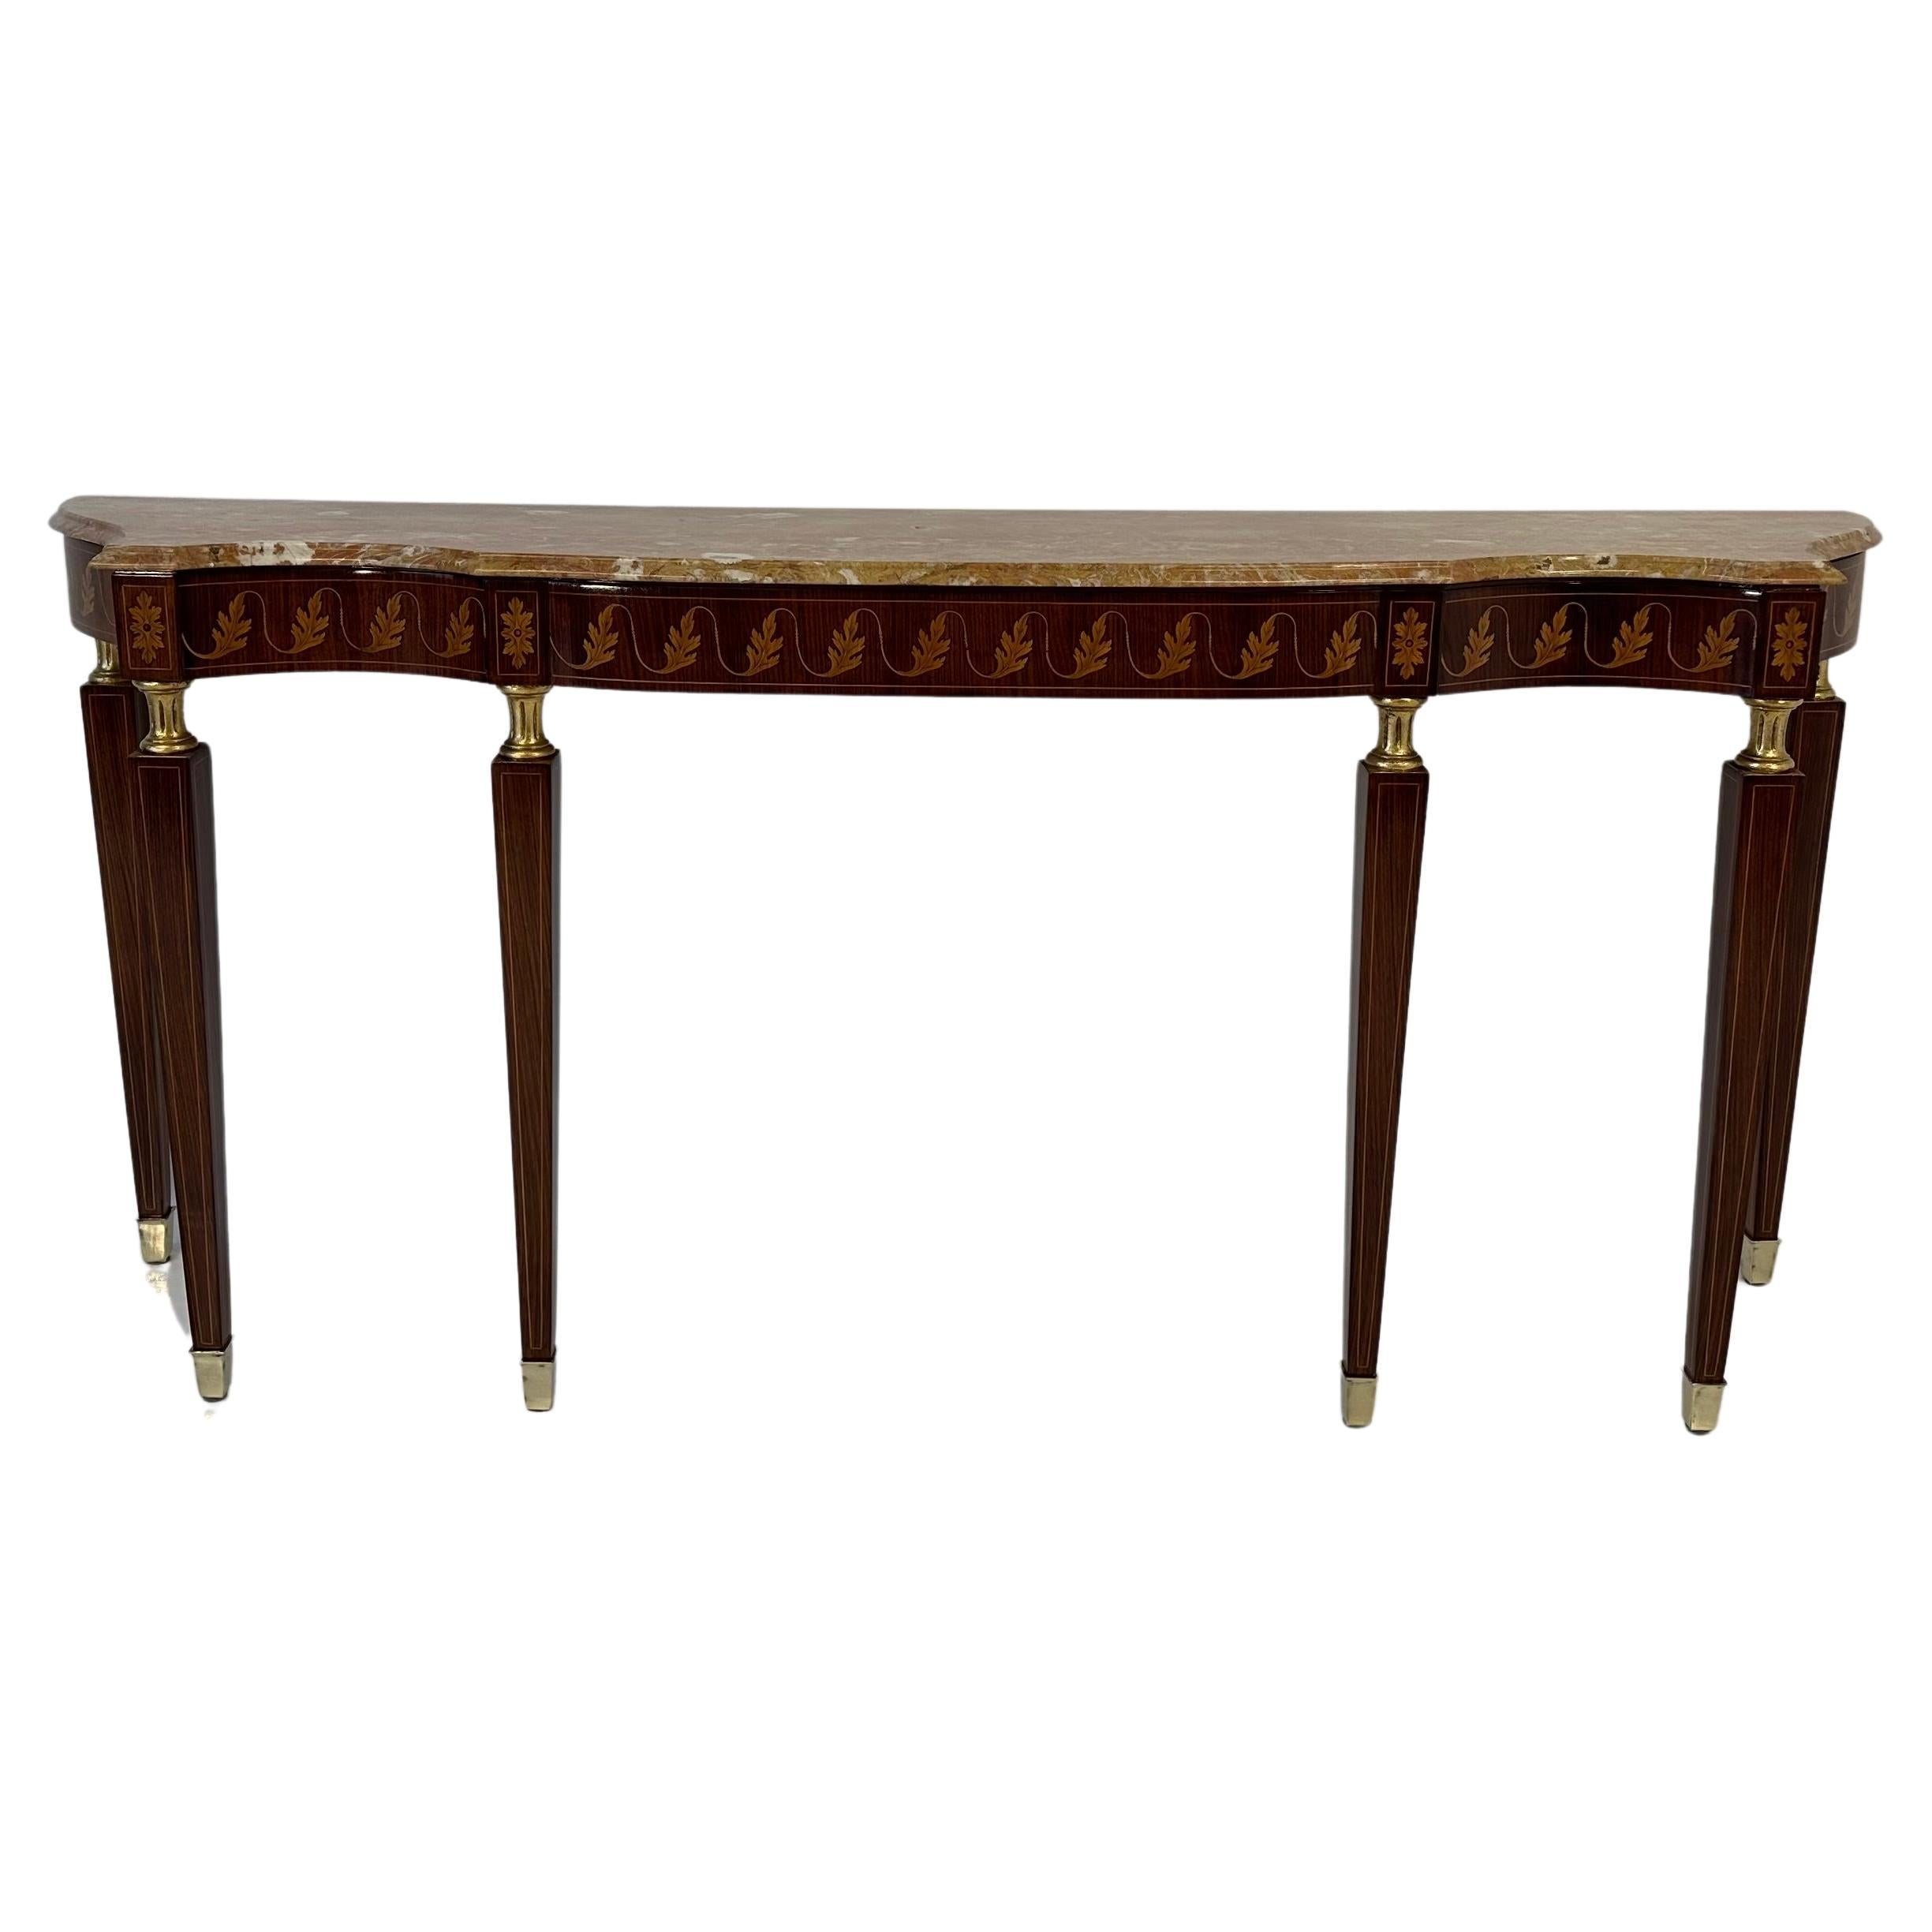 Italian Art Deco Marble and Inlaid Wood Console, Attr. to Paolo Buffa, 1950s For Sale